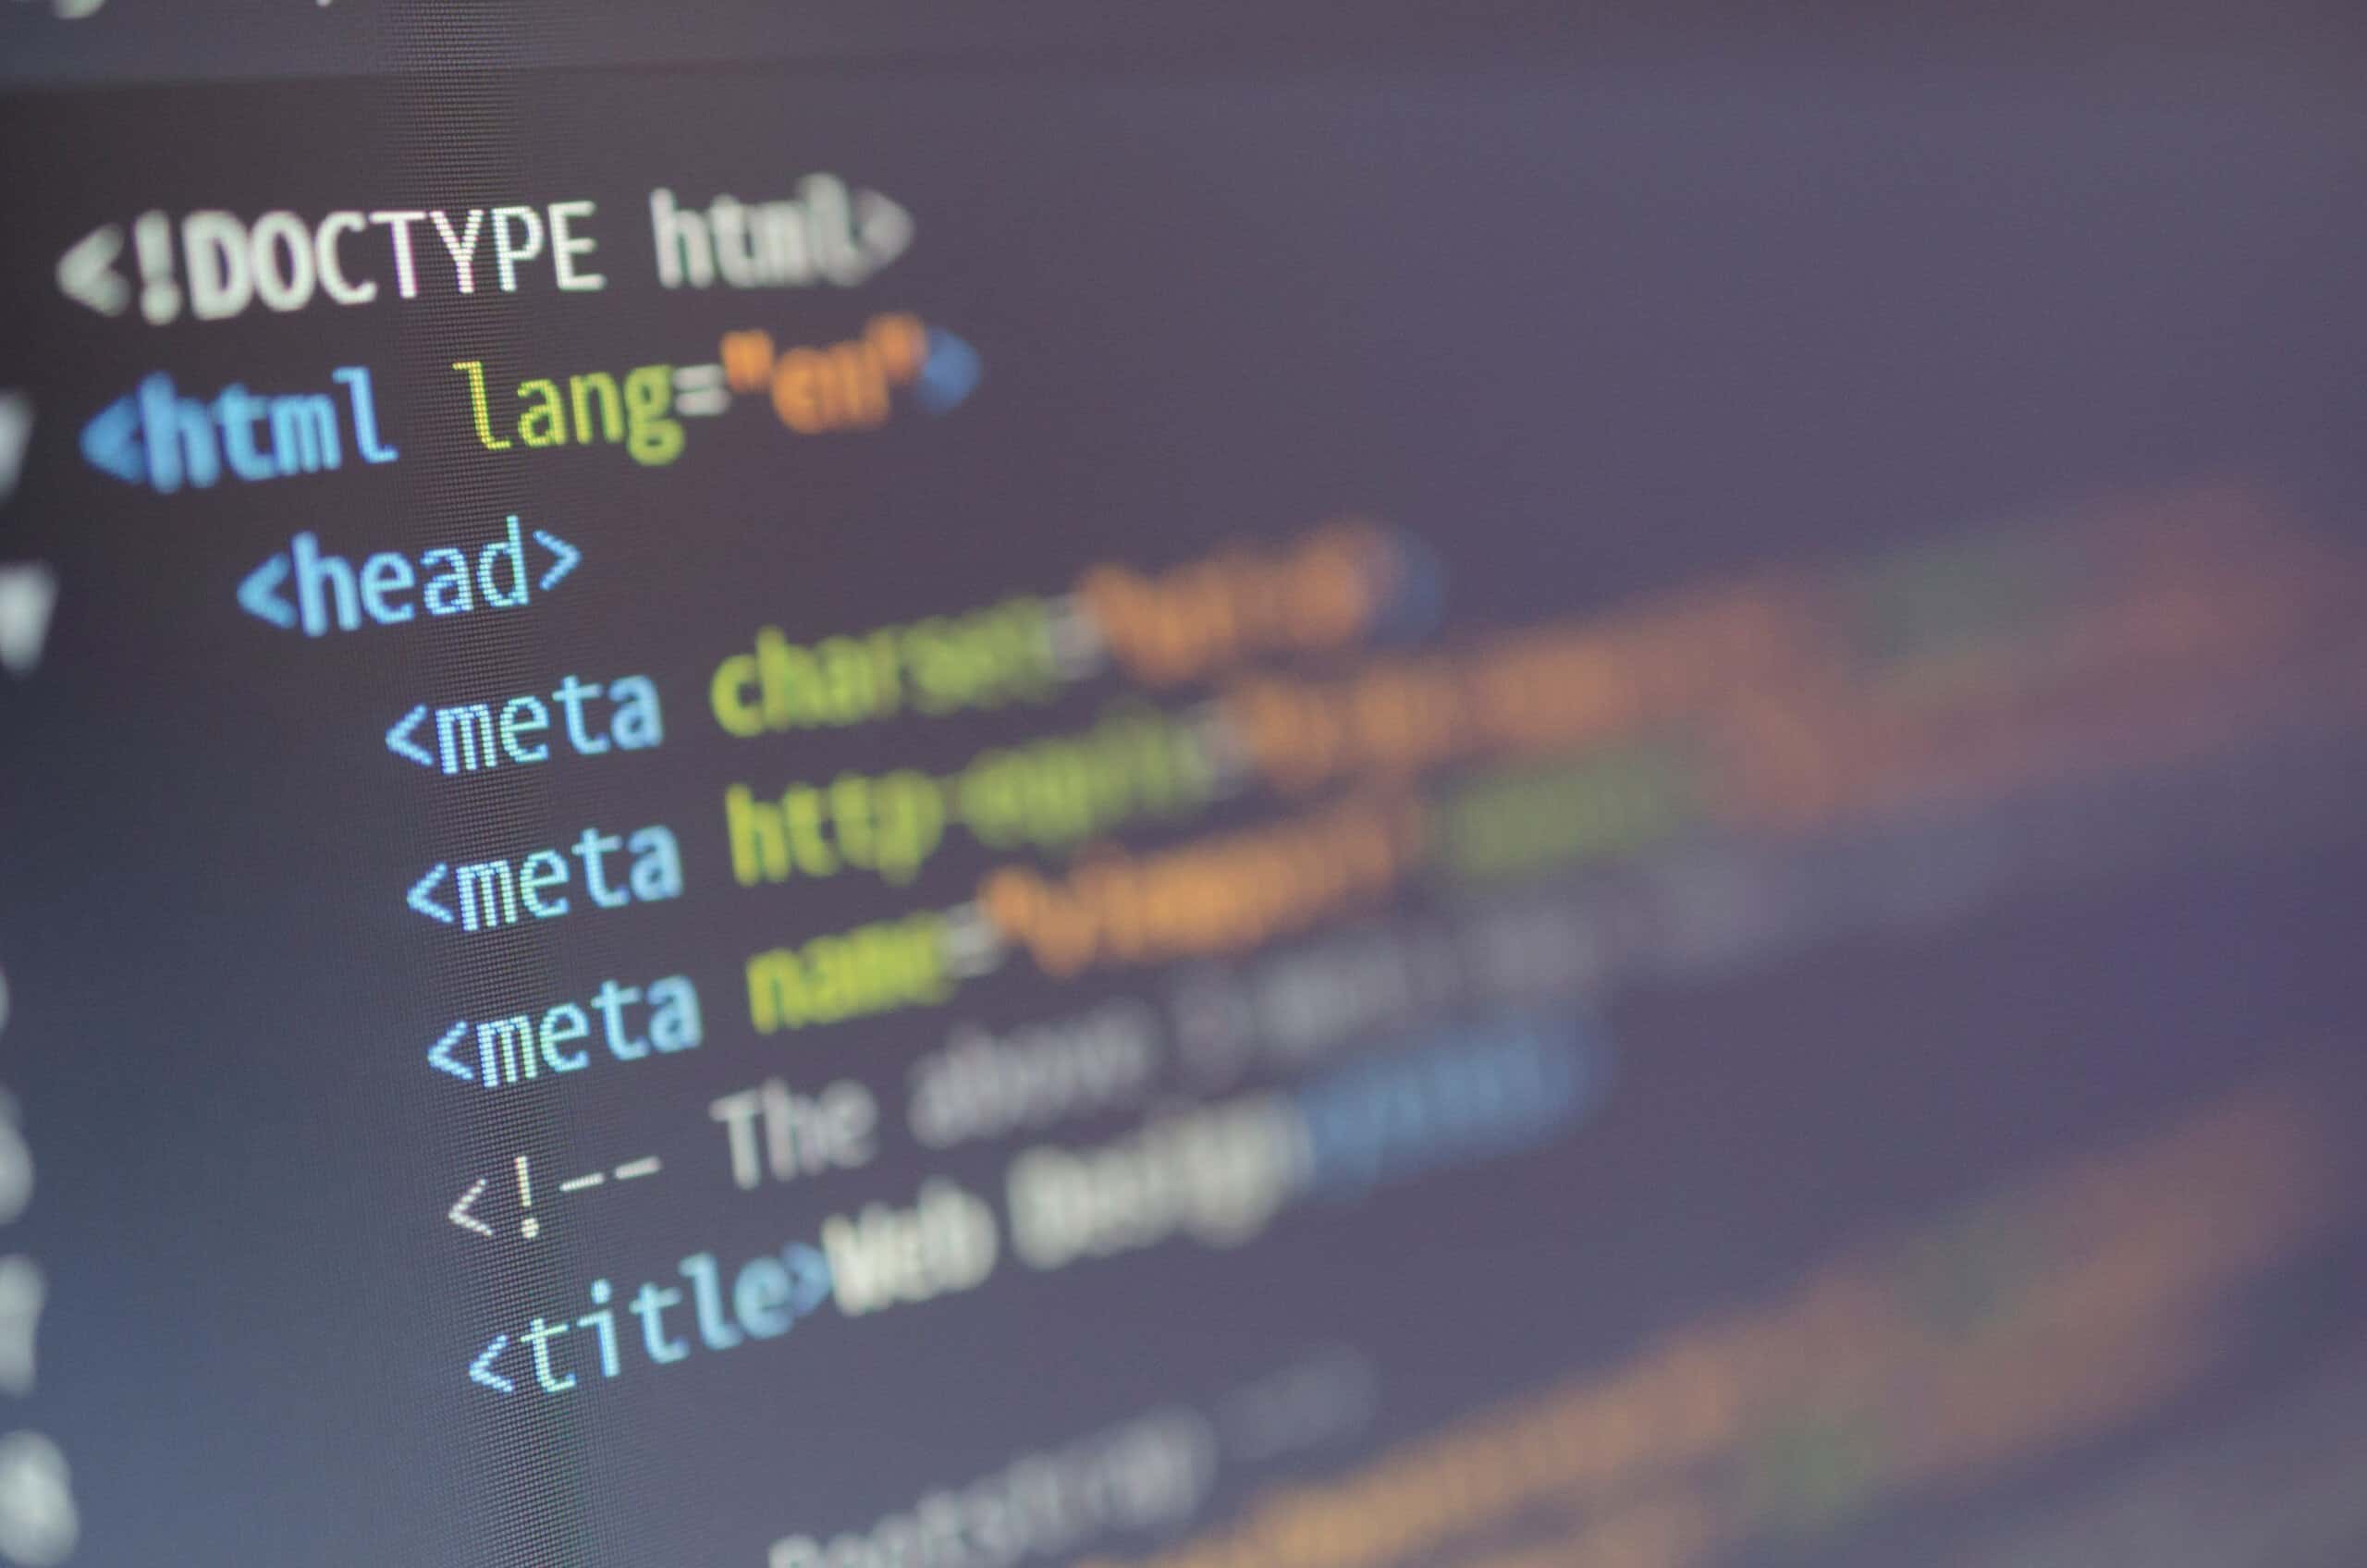 html and css web design code for developers